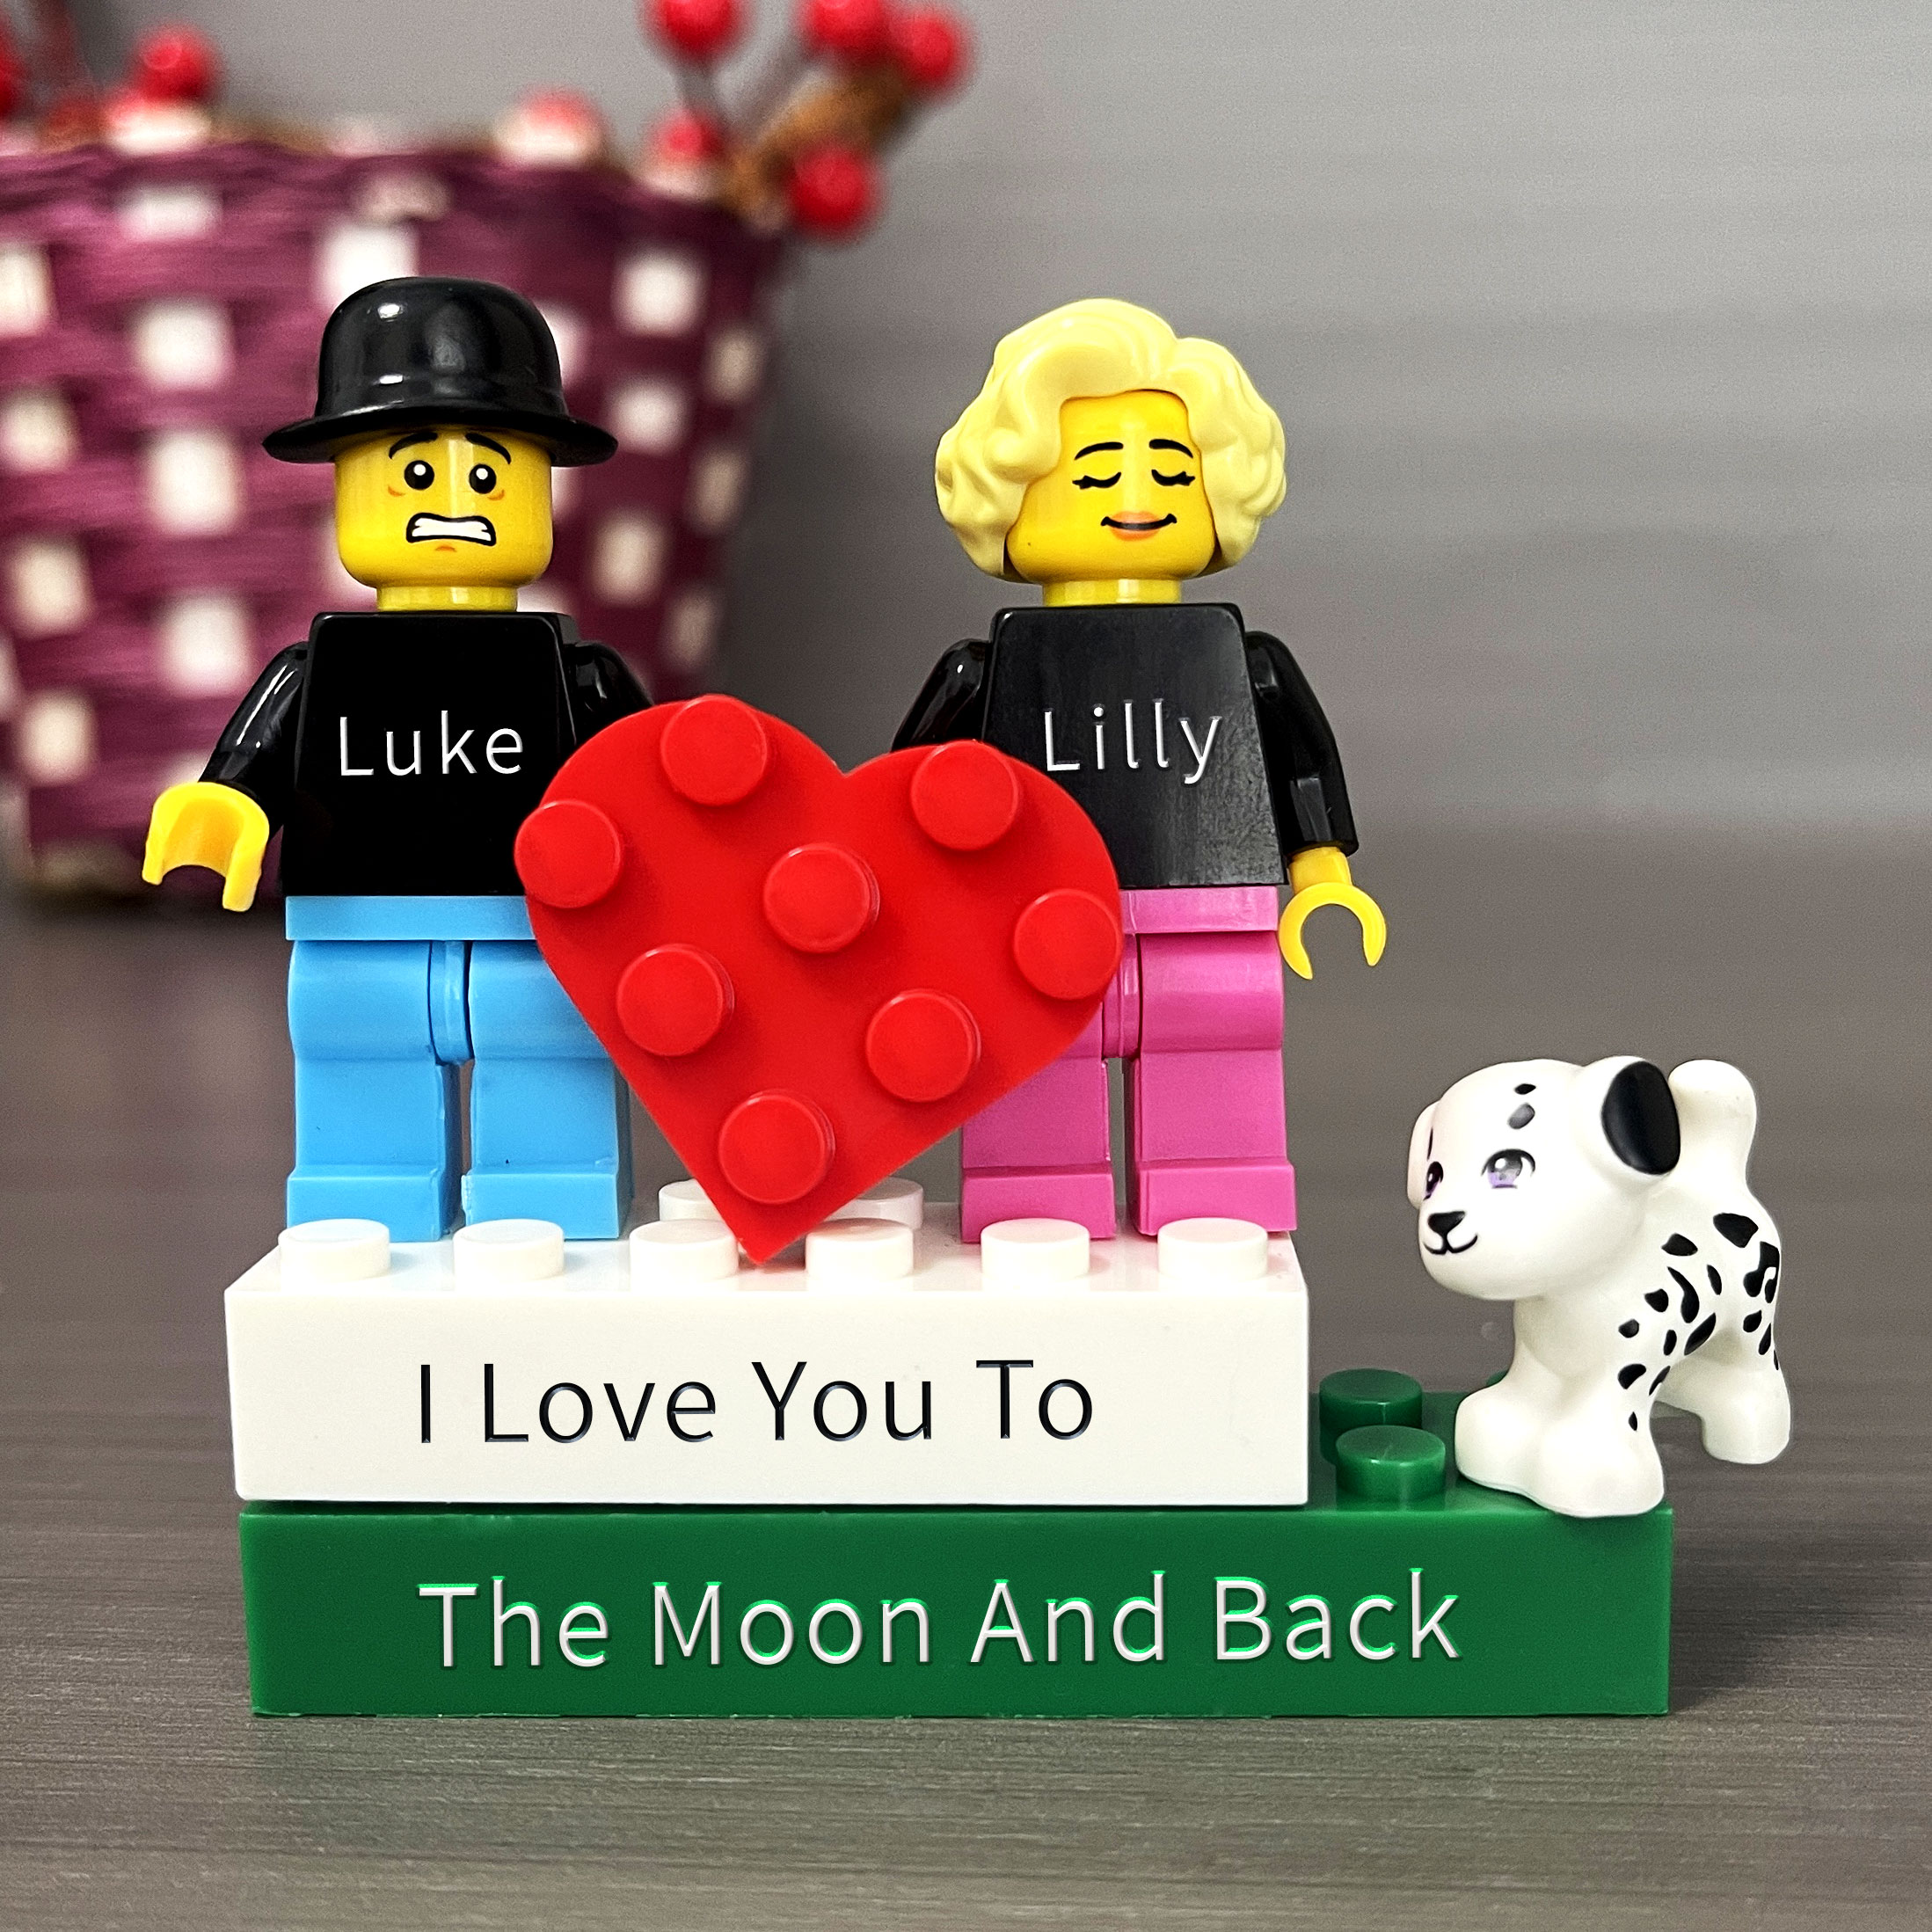 I Love You Personalized Figures on Personalized Brick With Love/Pets For Happy Valentine's Day Merry Christmas